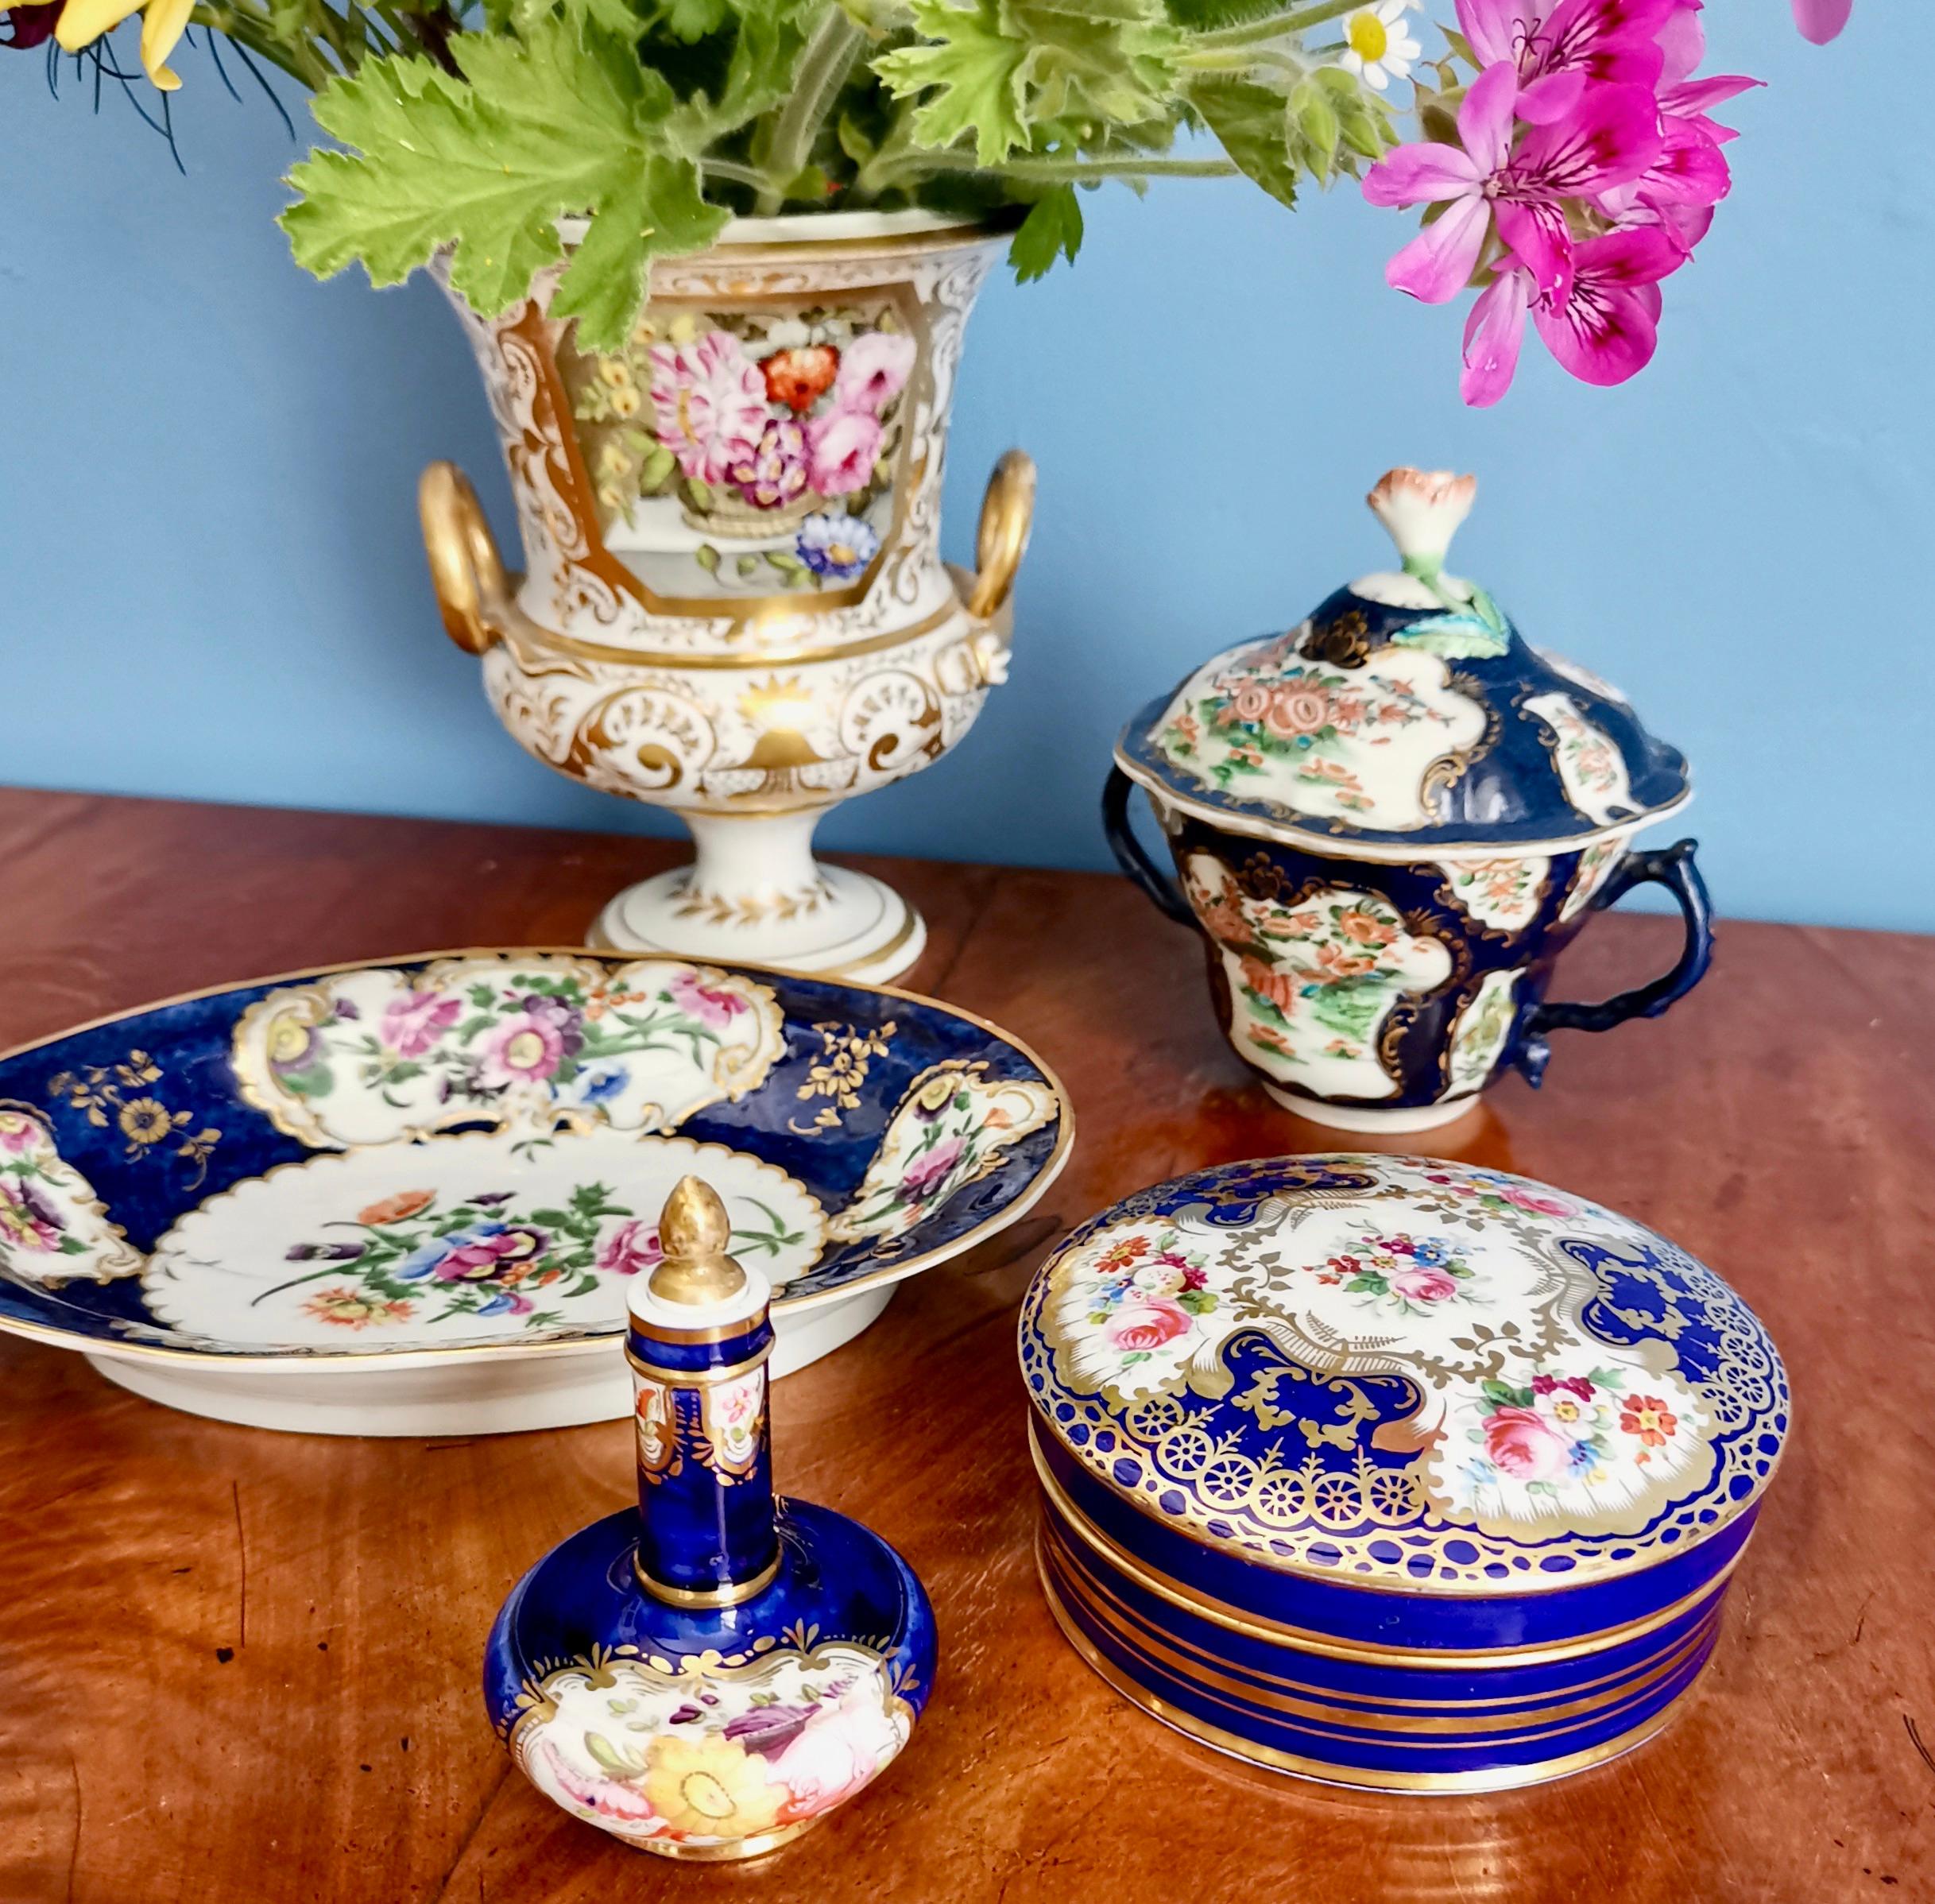 This is a beautiful porcelain scent bottle made by Coalport in circa 1820, which was the Regency era. The bottle has a deep cobalt blue ground with stunning flowers and gilding, and a gilded stopper.

Coalport was one of the leading potters in